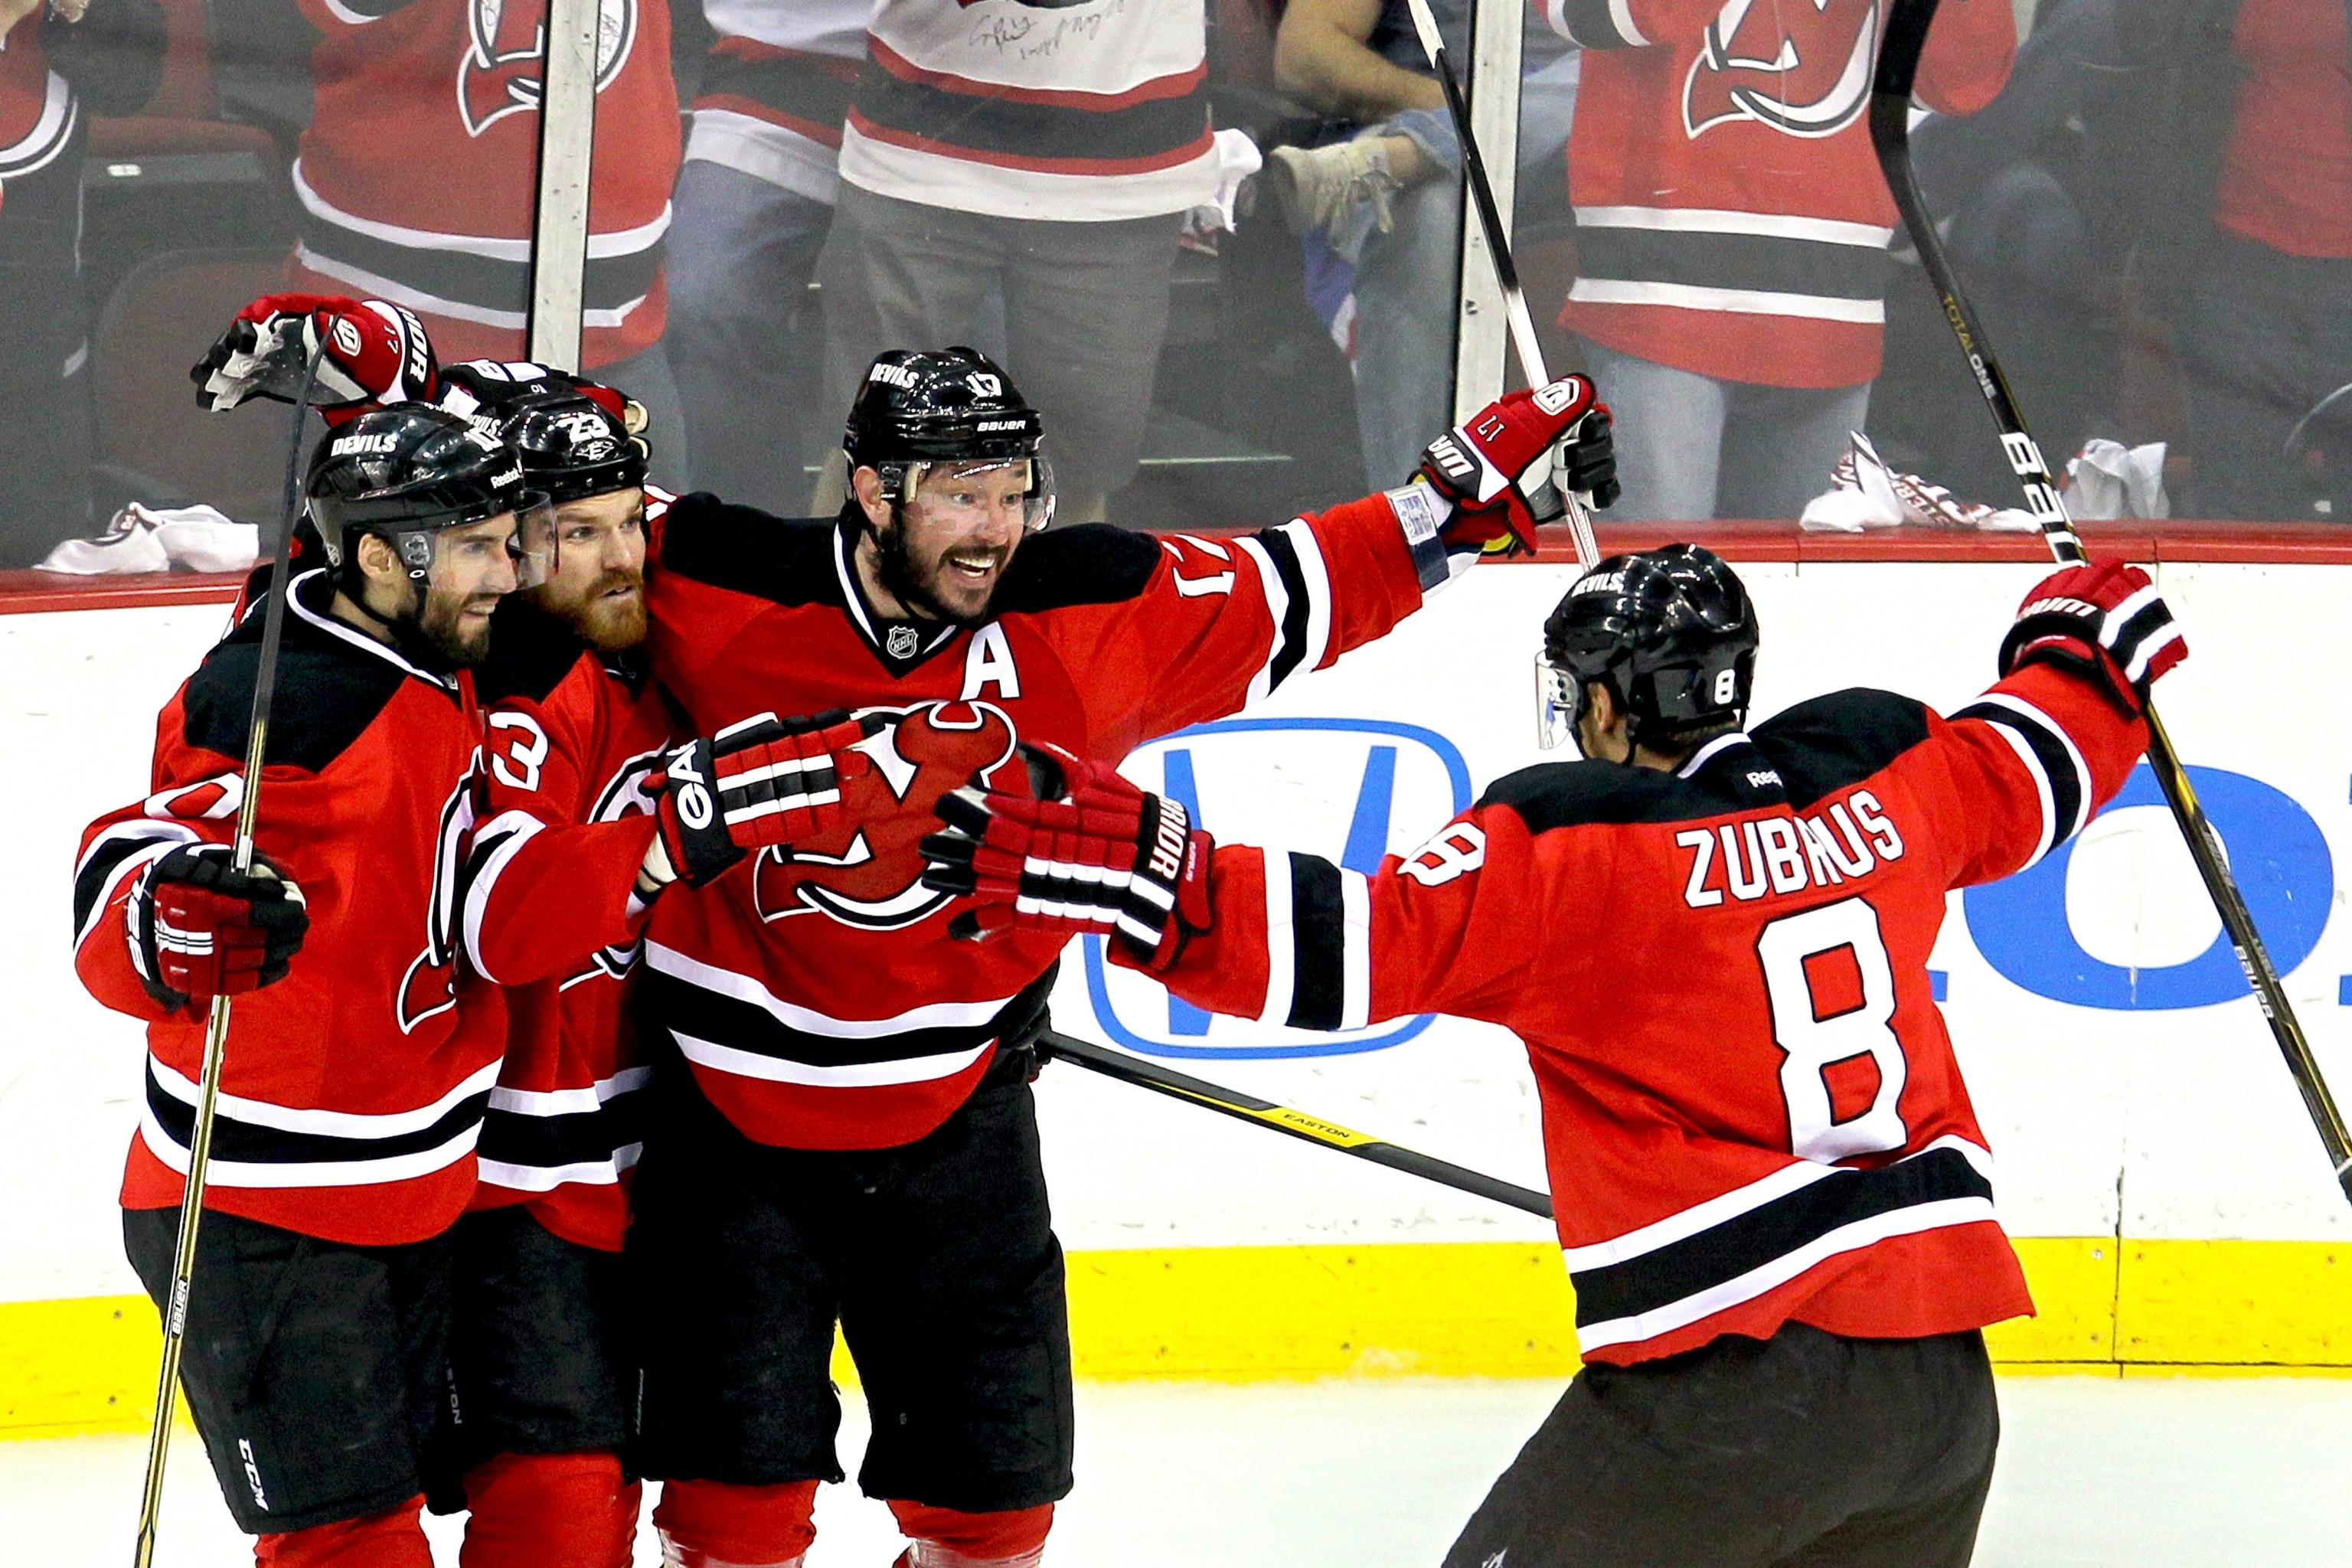 Adam Henrique Overtime Winner Gives New Jersey Devils 3-2 Win & Eliminates  the New York Rangers to Win the Eastern Conference - All About The Jersey